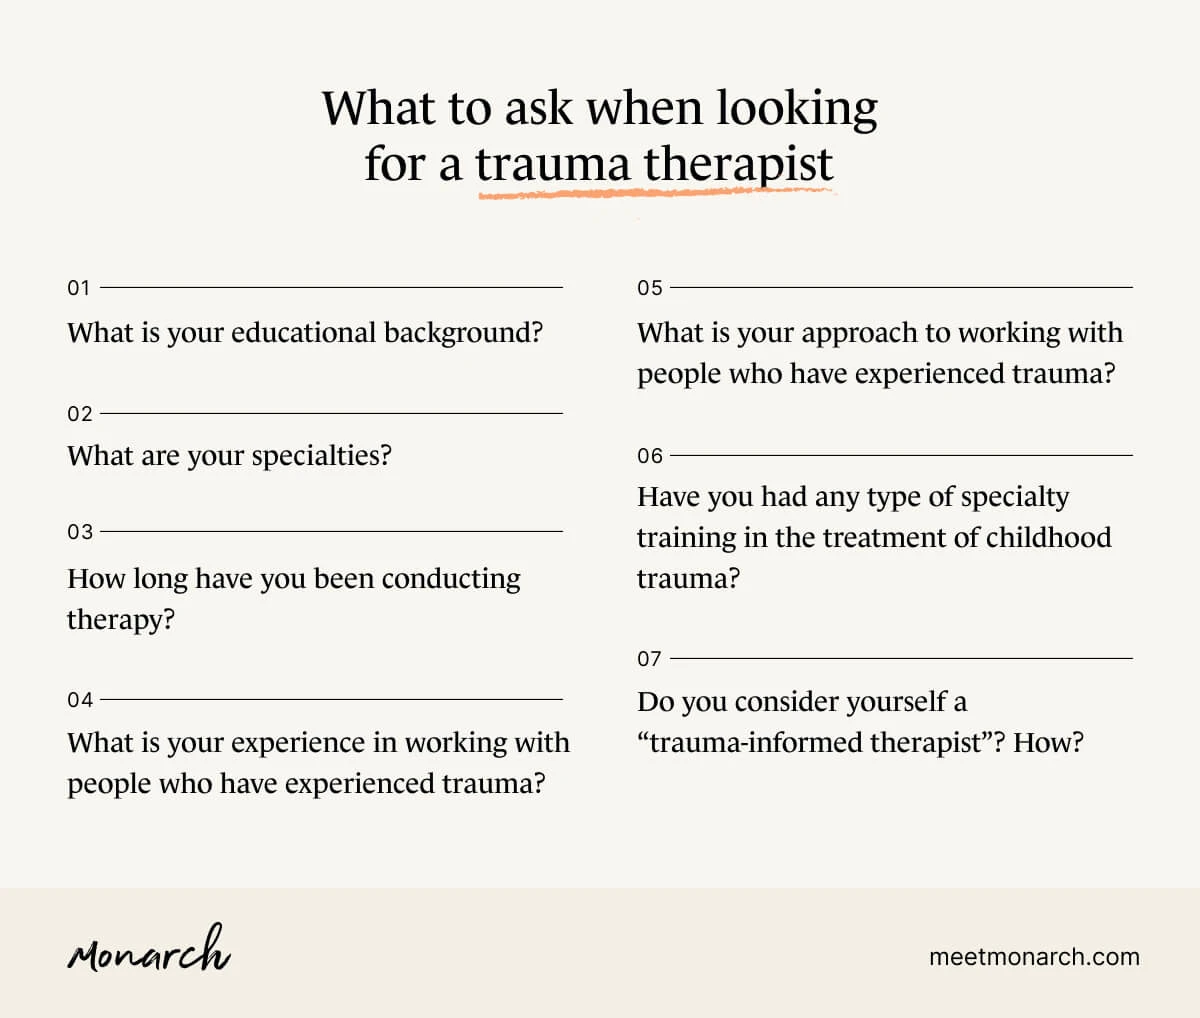 A Monarch by SimplePractice infographic of what to ask when looking for a trauma therapist.